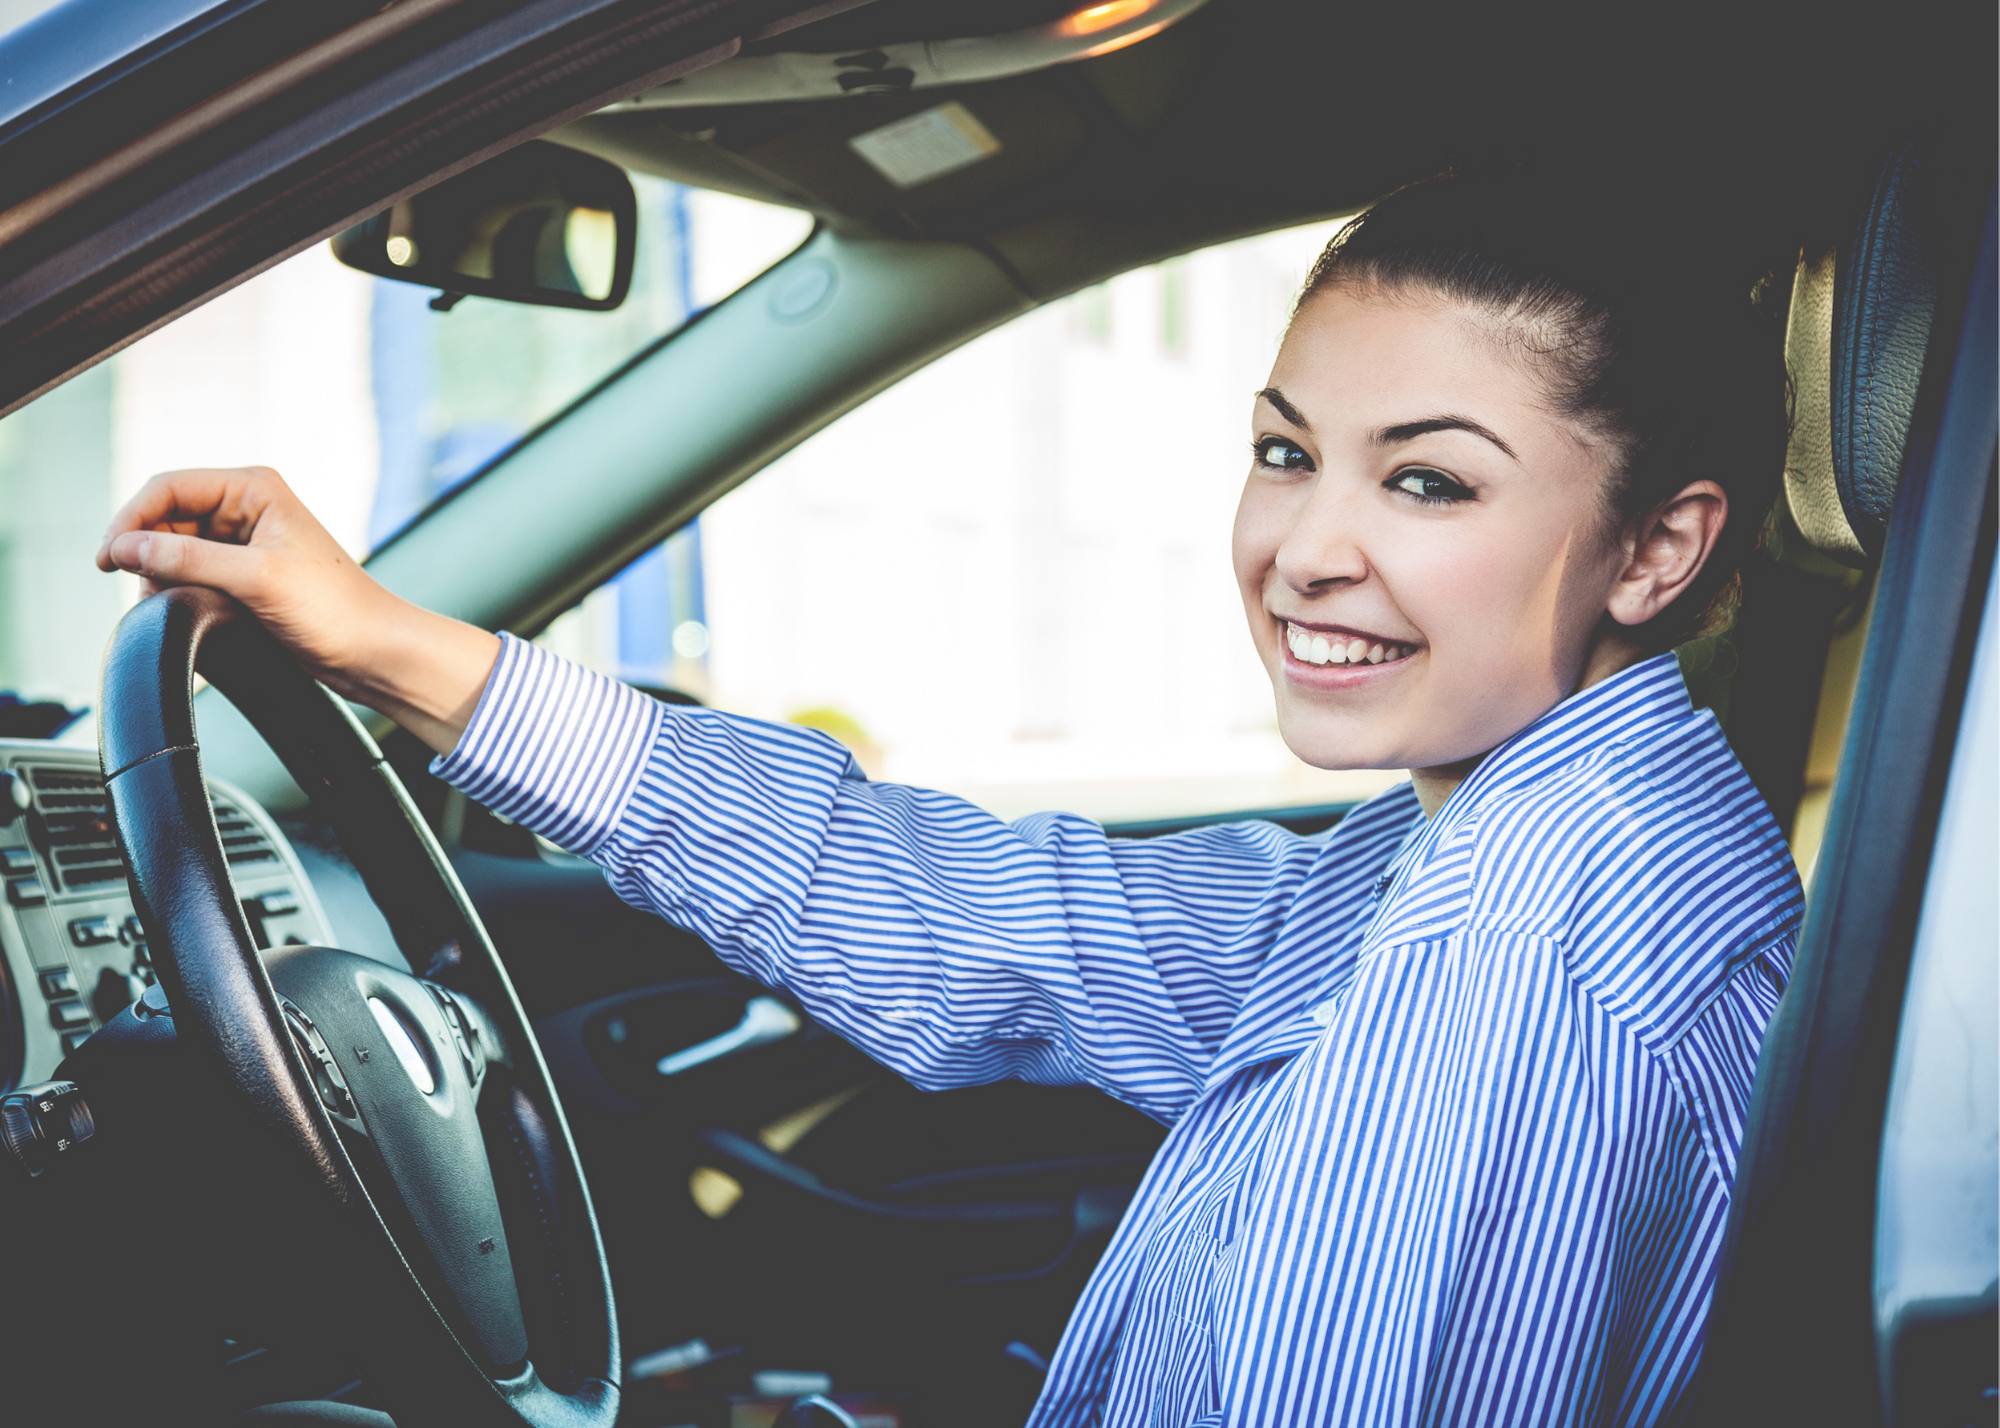 photo of young woman smiling in a car with one hand on the wheel